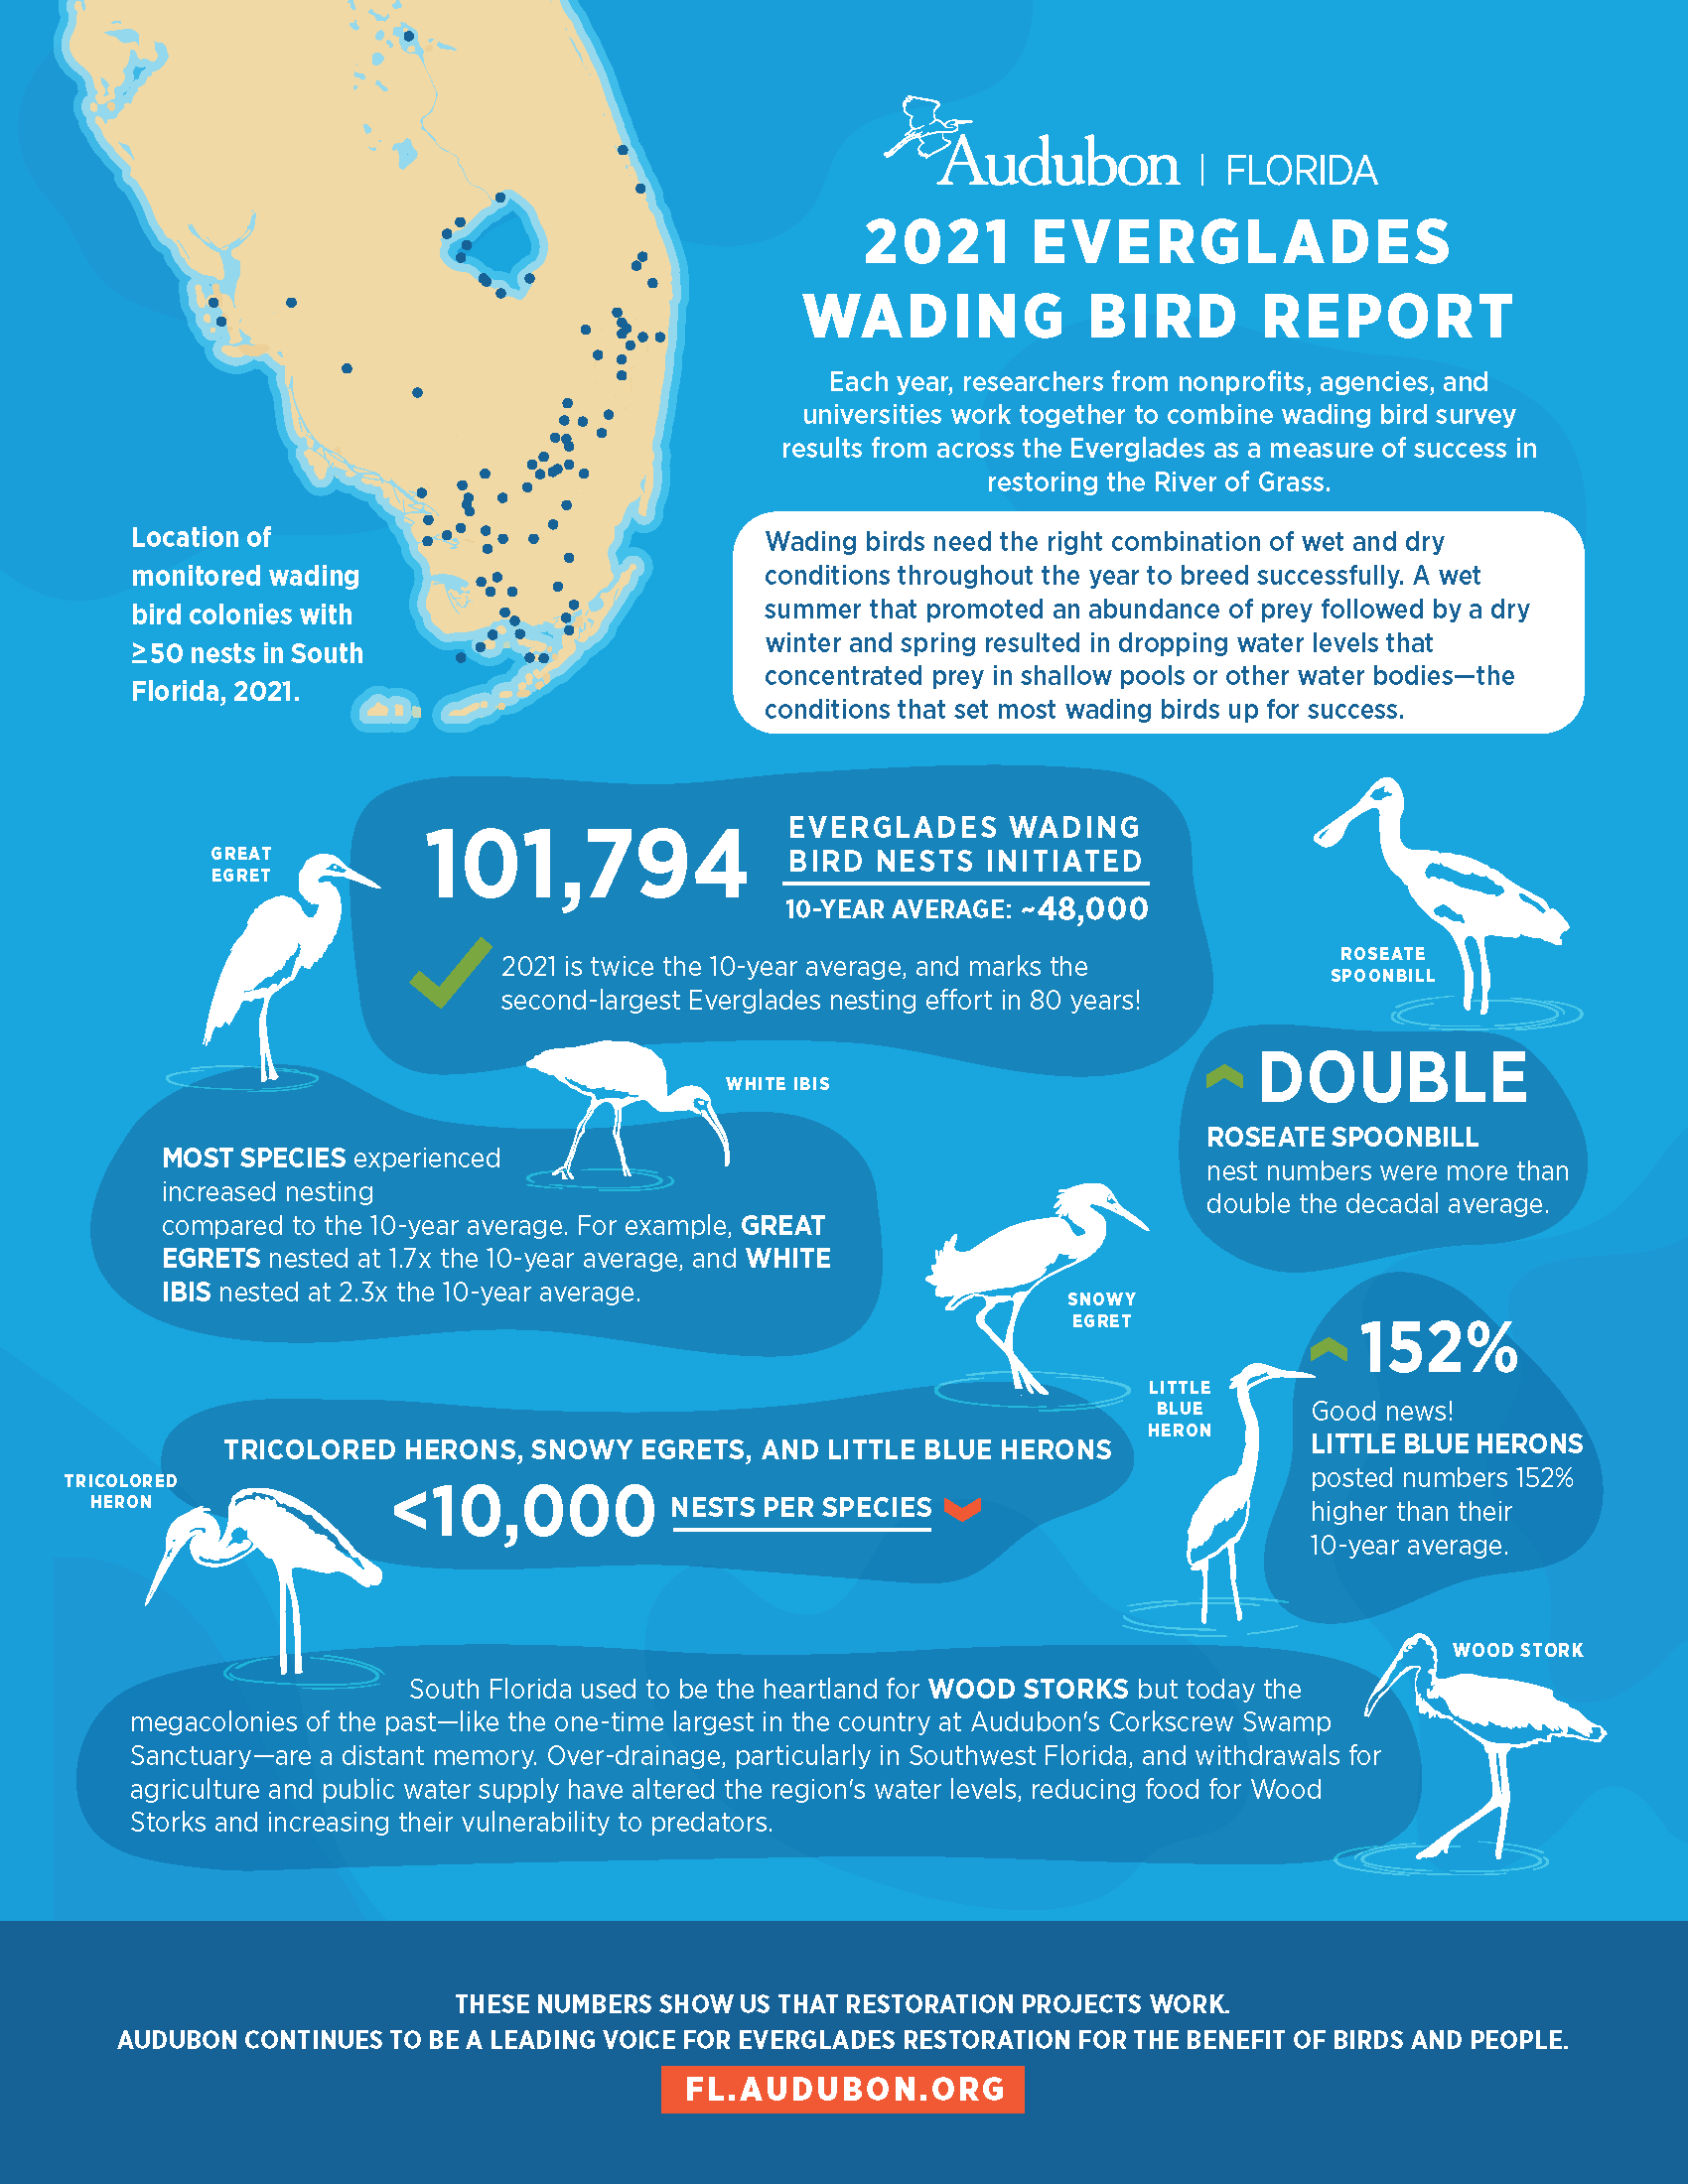 An infographic describing the results of the wading bird report.